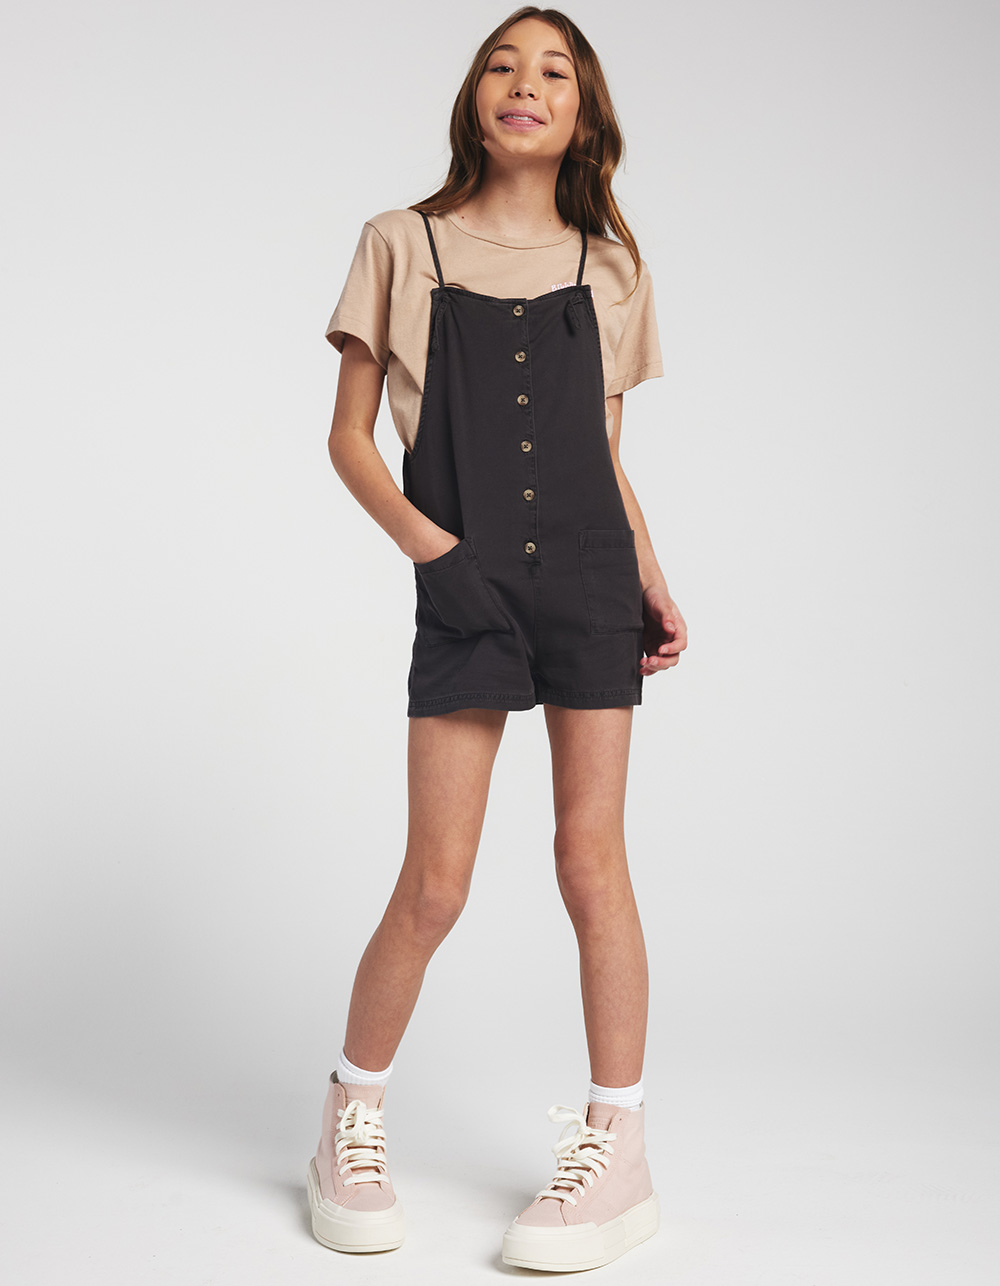 Cute Clothes for Girls & Teens